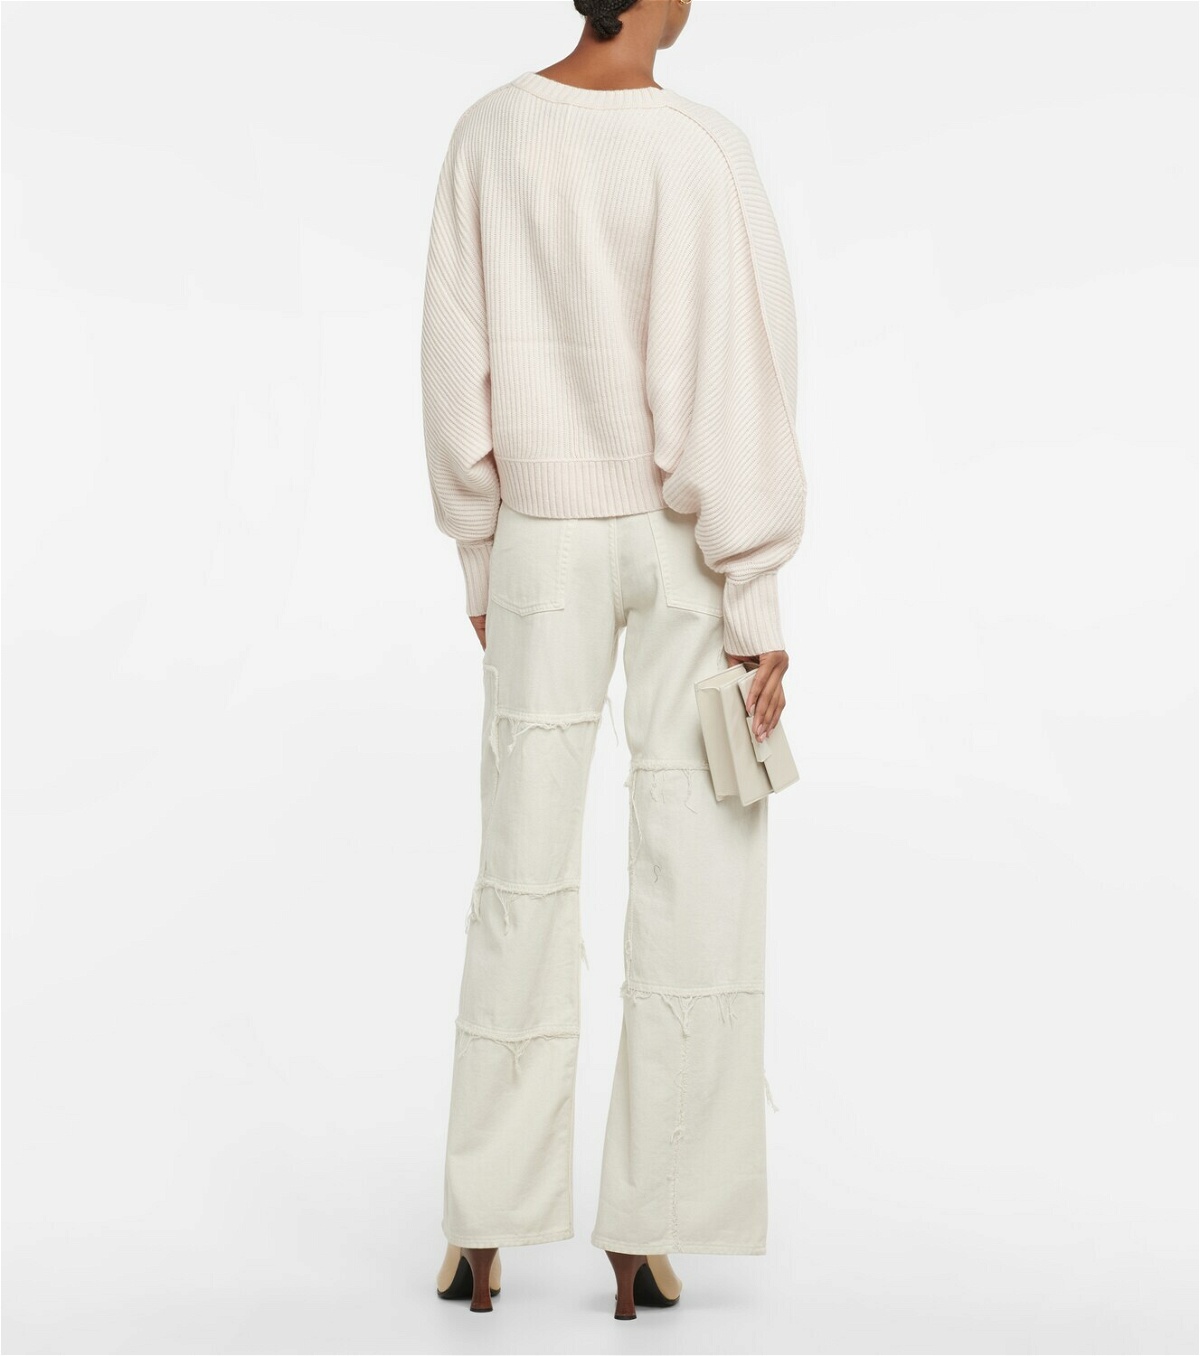 Dorothee Schumacher - Ribbed wool and cashmere sweater Dorothee Schumacher